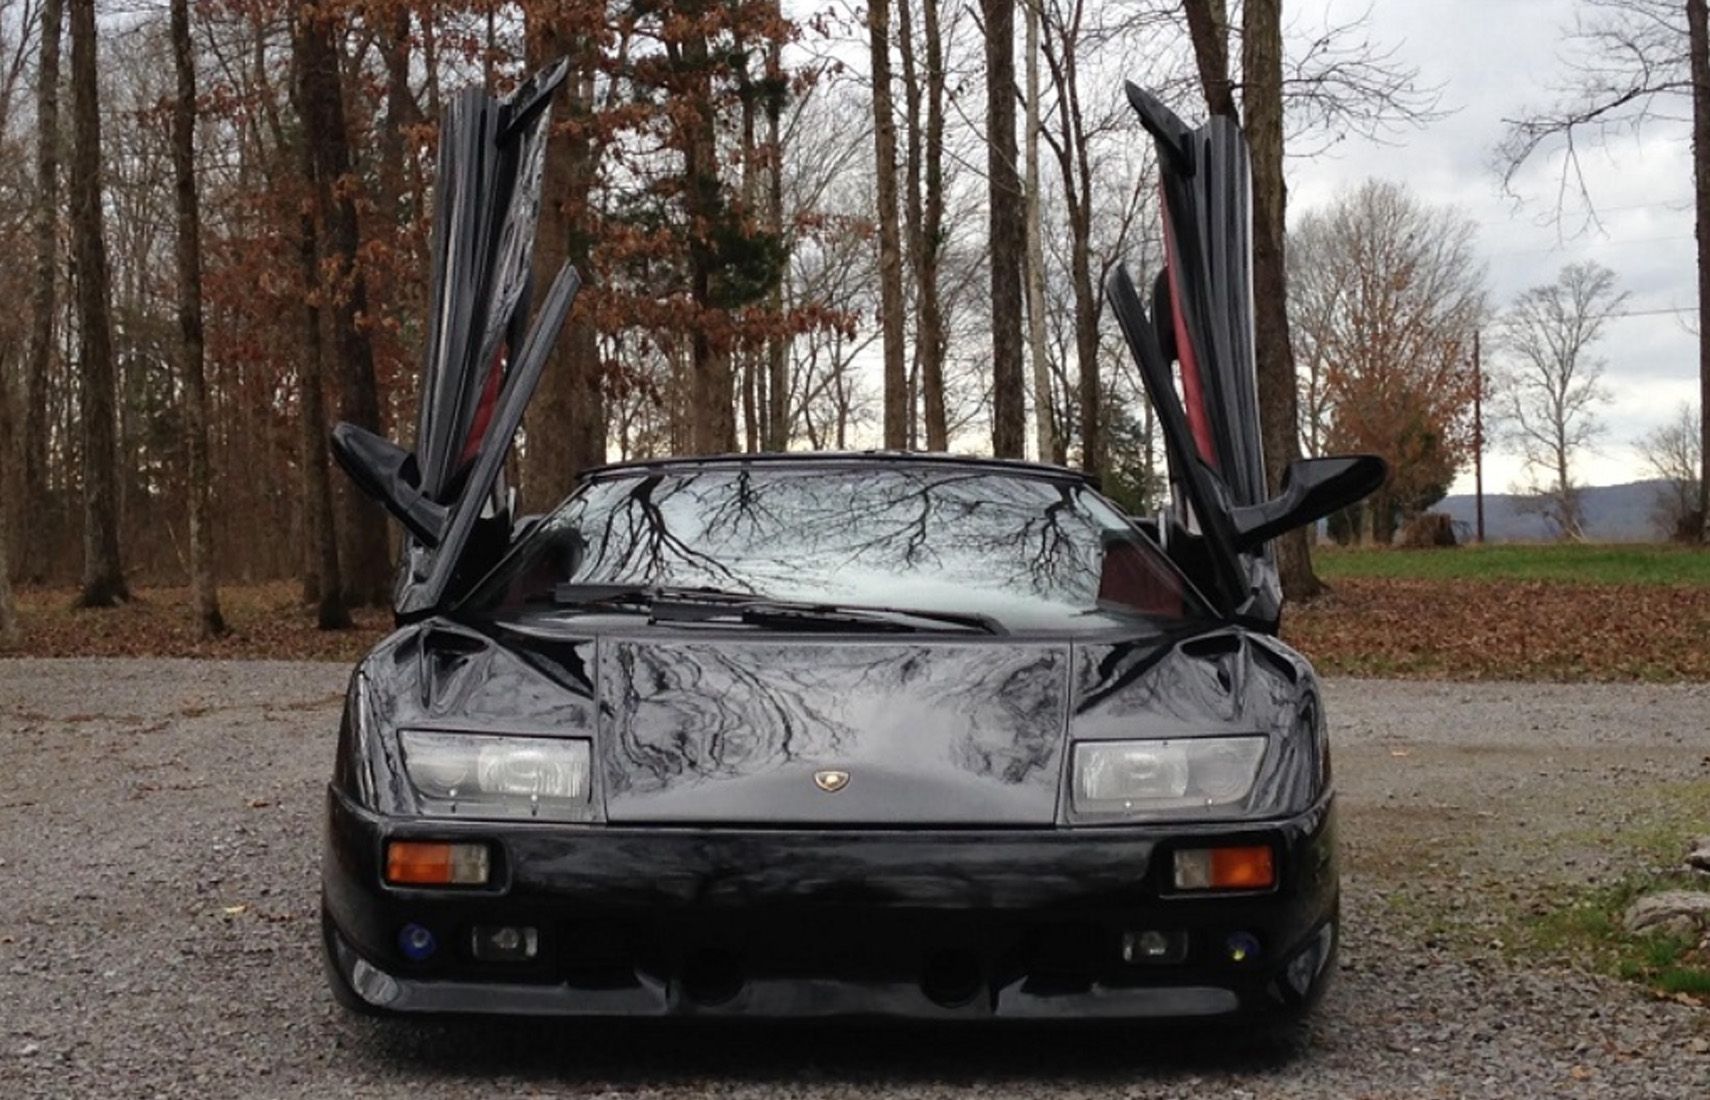 According To Lamborghini Replica, 1999 Lamborghini Diablo Was Specifically “Built” For The Movie Redline And Was Sold, At An Asking Price Of $45,000